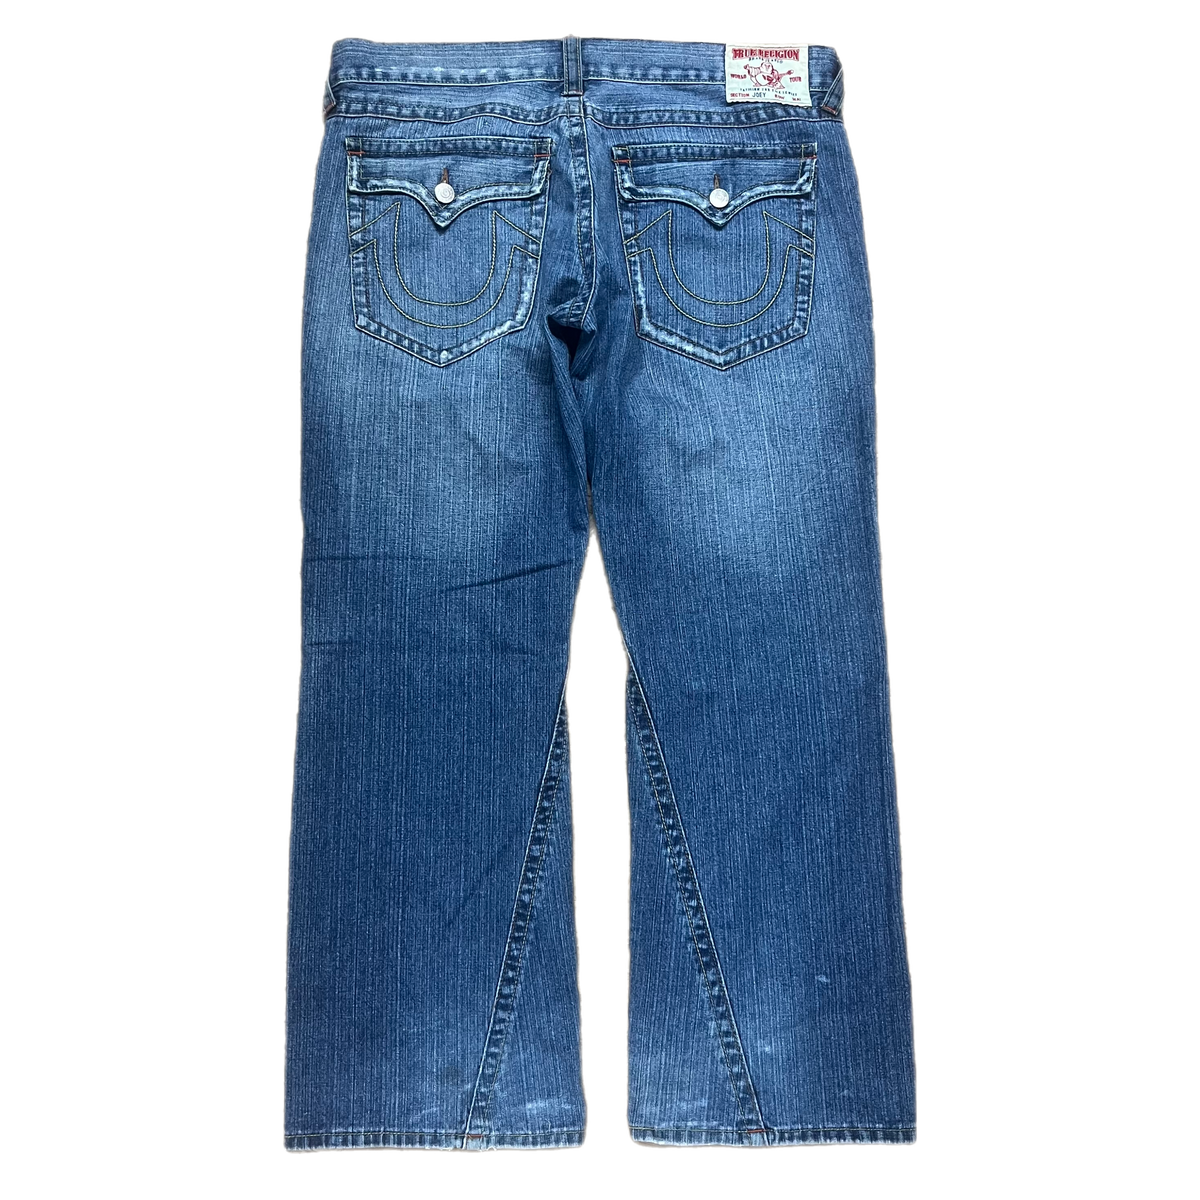 Buy Ricky SN Straight Jean Men's Jeans & Pants from True Religion. Find True  Religion fashion & more at DrJays.com